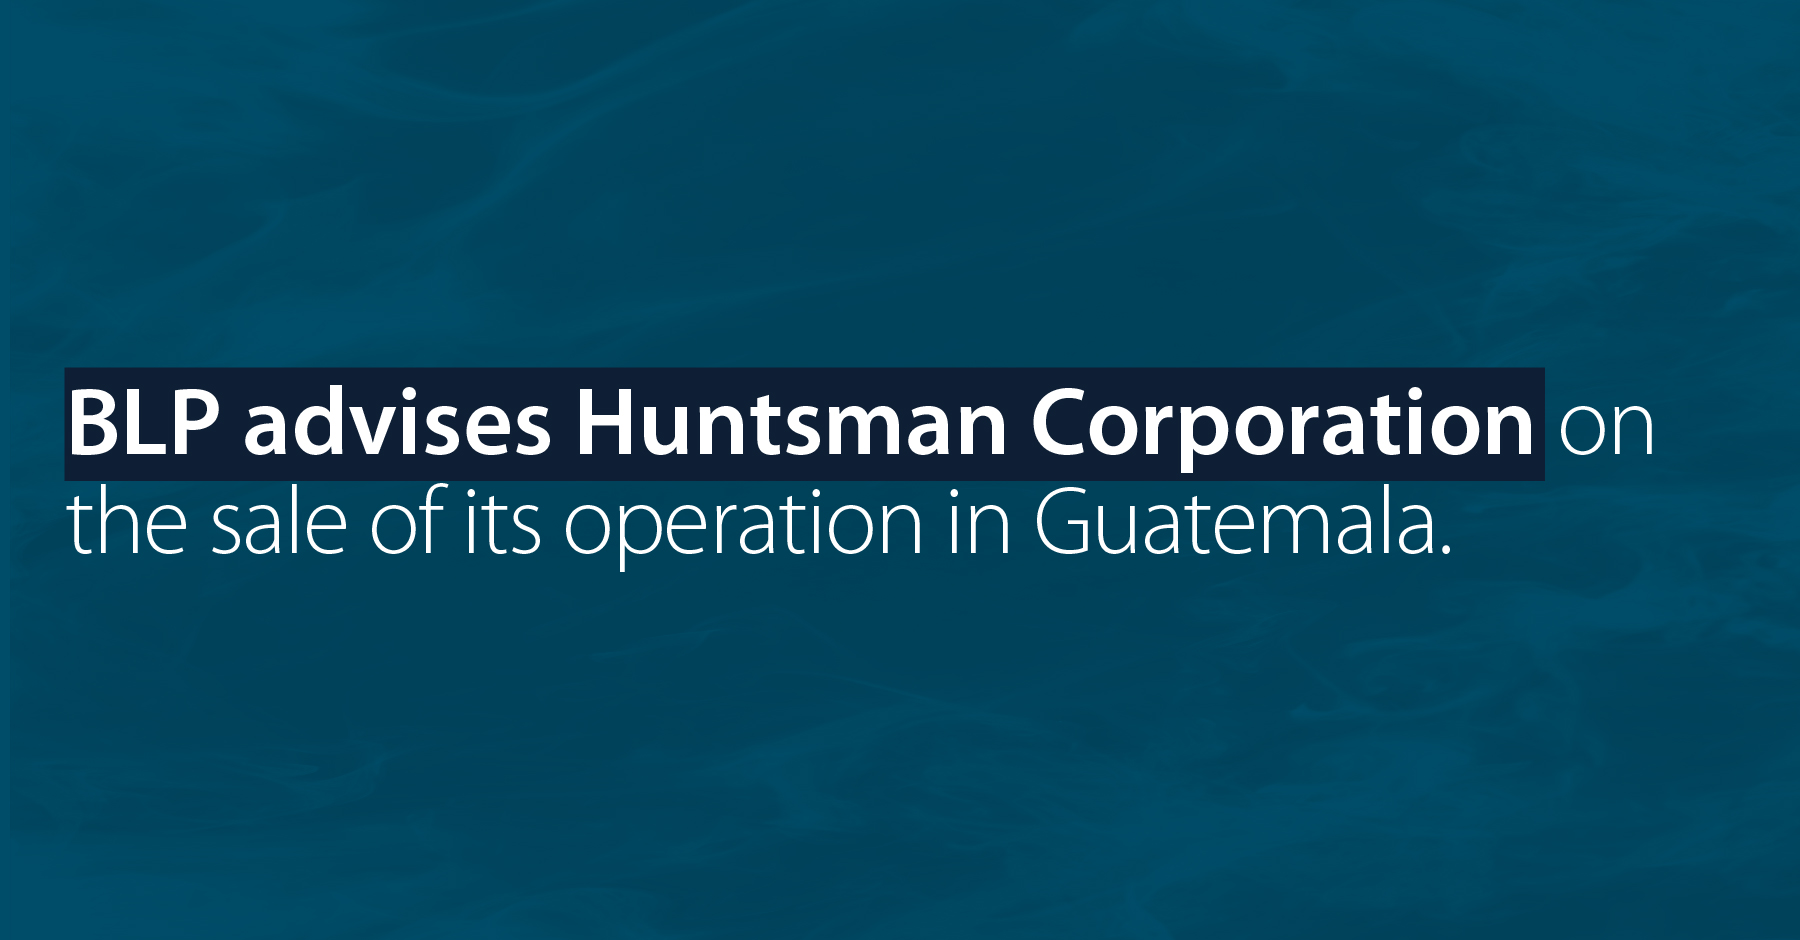 BLP advises Huntsman Corporation on the sale of its operation in Guatemala